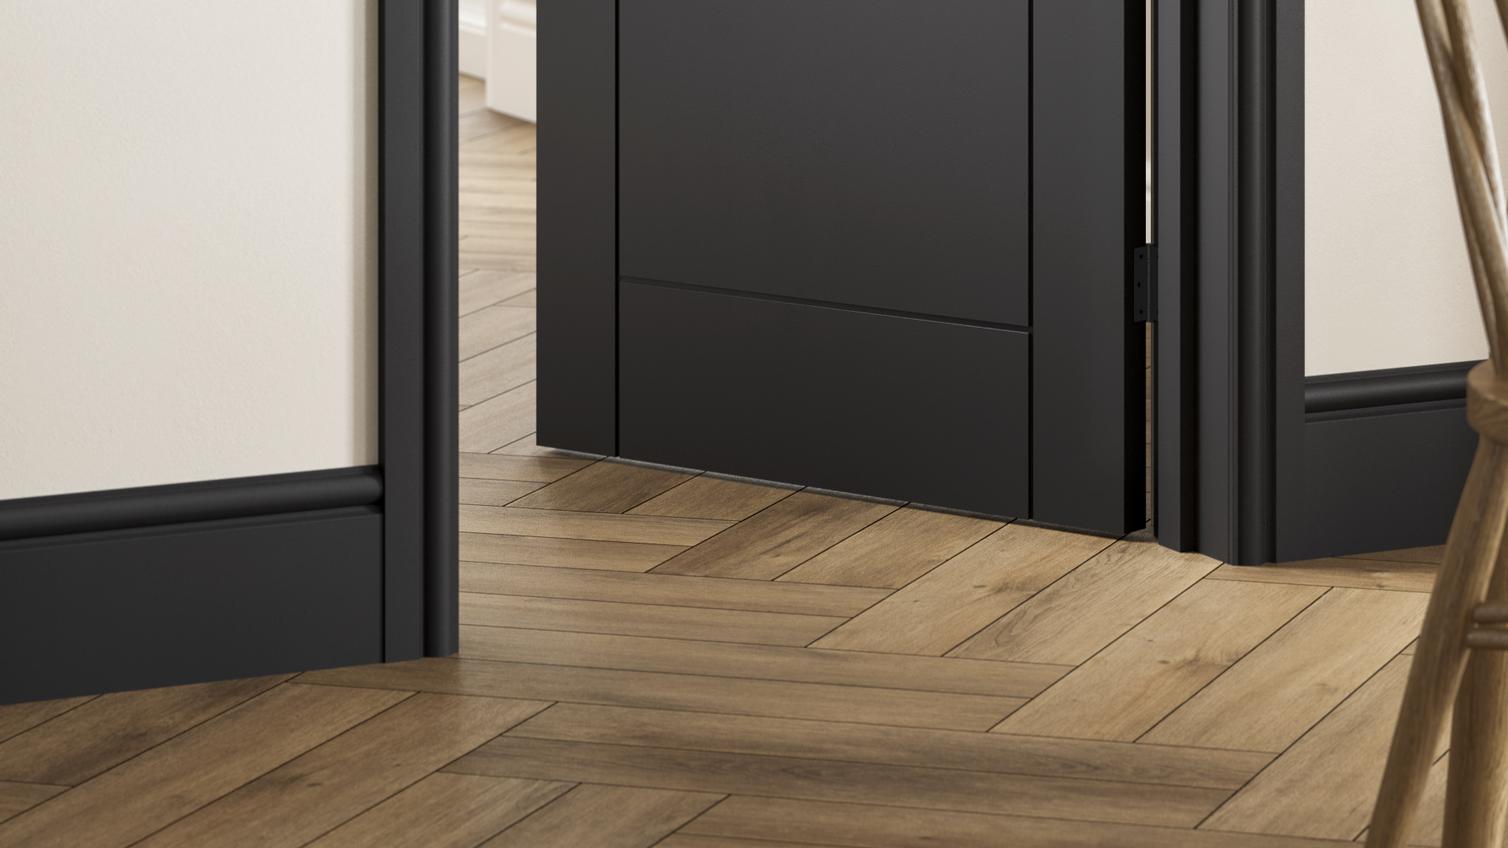 Black internal door in a dining room with five panels, plus matching black skirting boards next to a chevron floor.